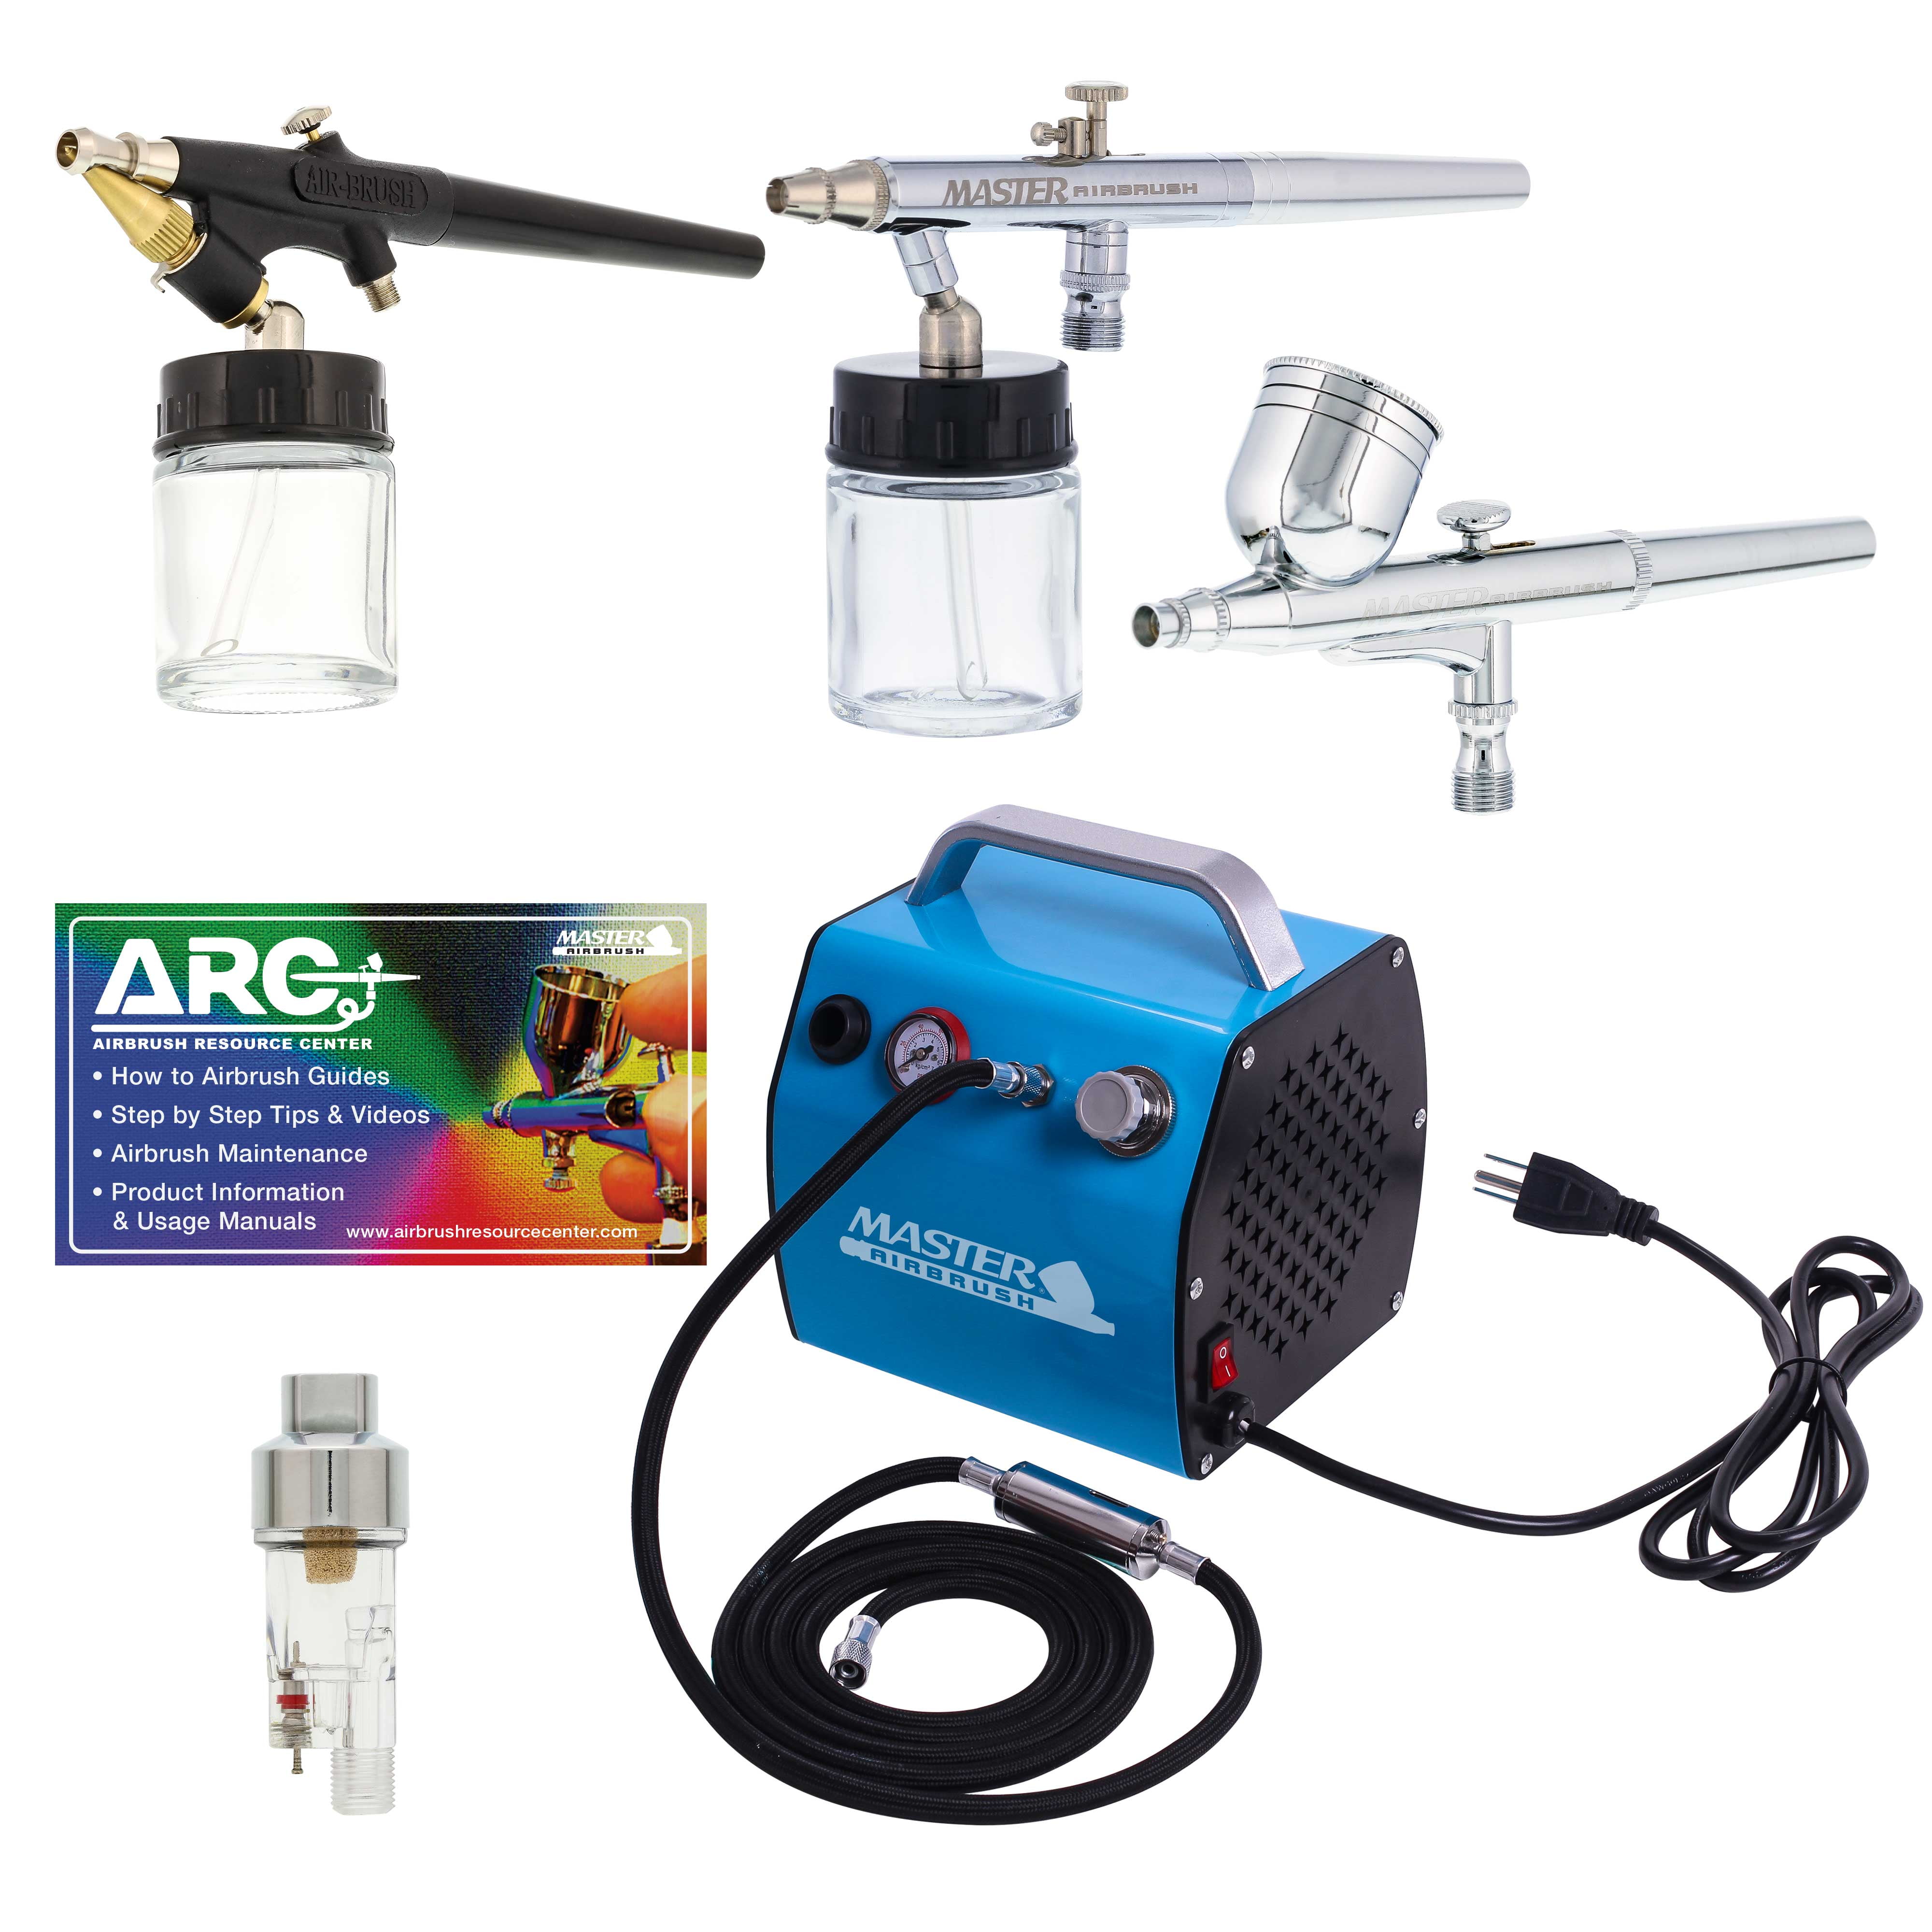 Master Airbrush BRAND Model G22 Airbrushing System With C16-g Gold Portable  Mini for sale online